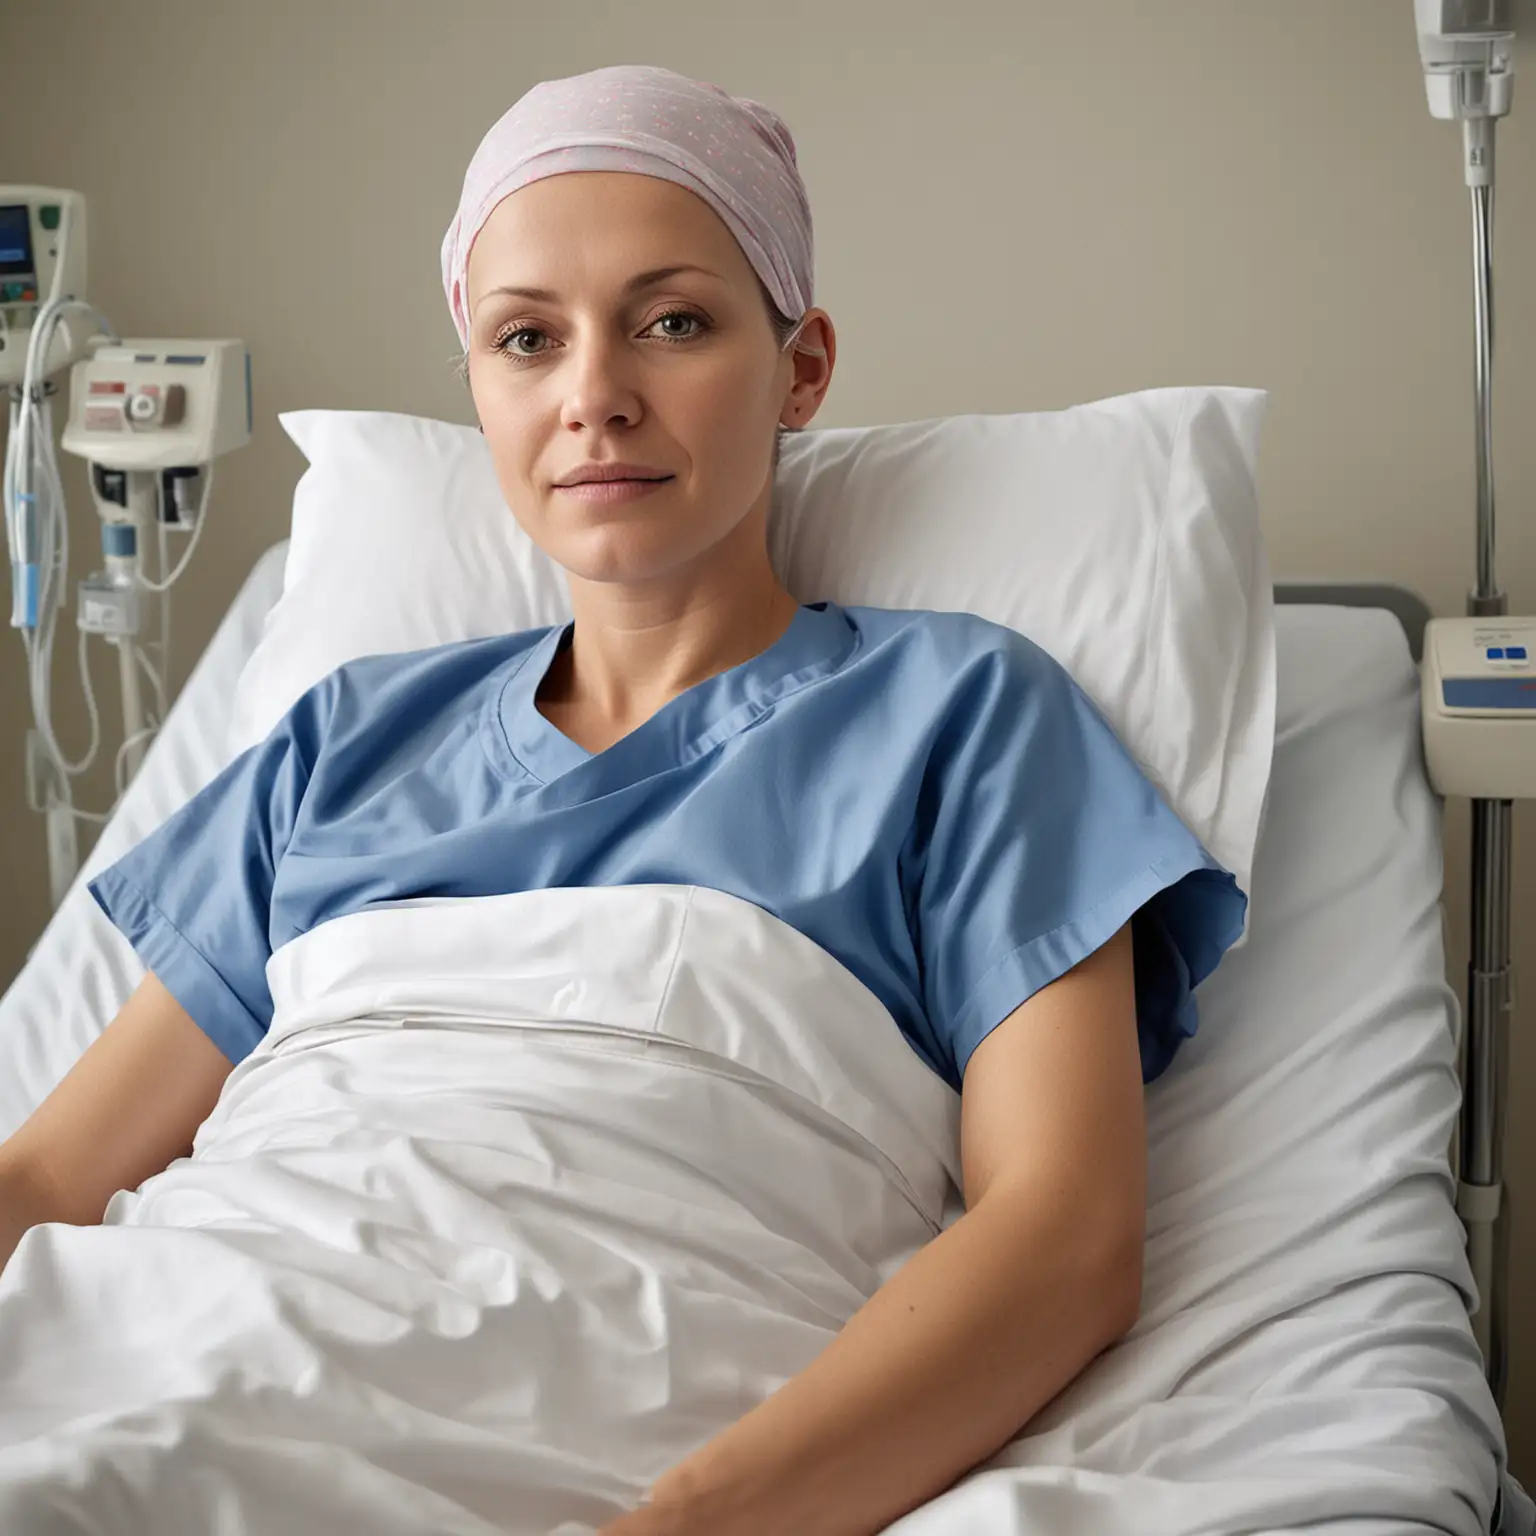 A realistic photograph of cancer patient in a hospital bed.